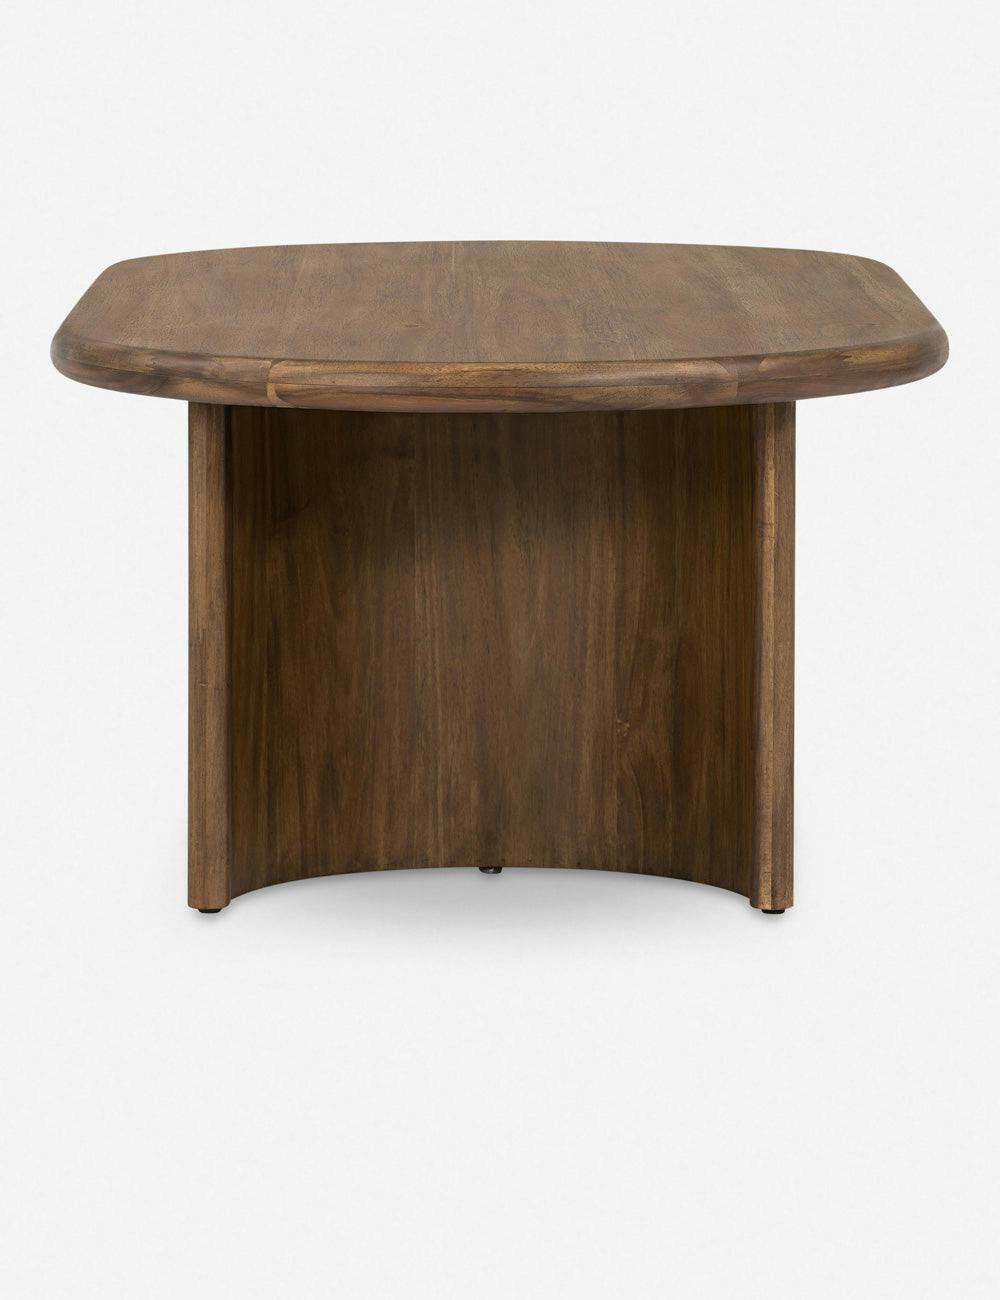 Contemporary Oval Acacia Wood Coffee Table in Rich Brown